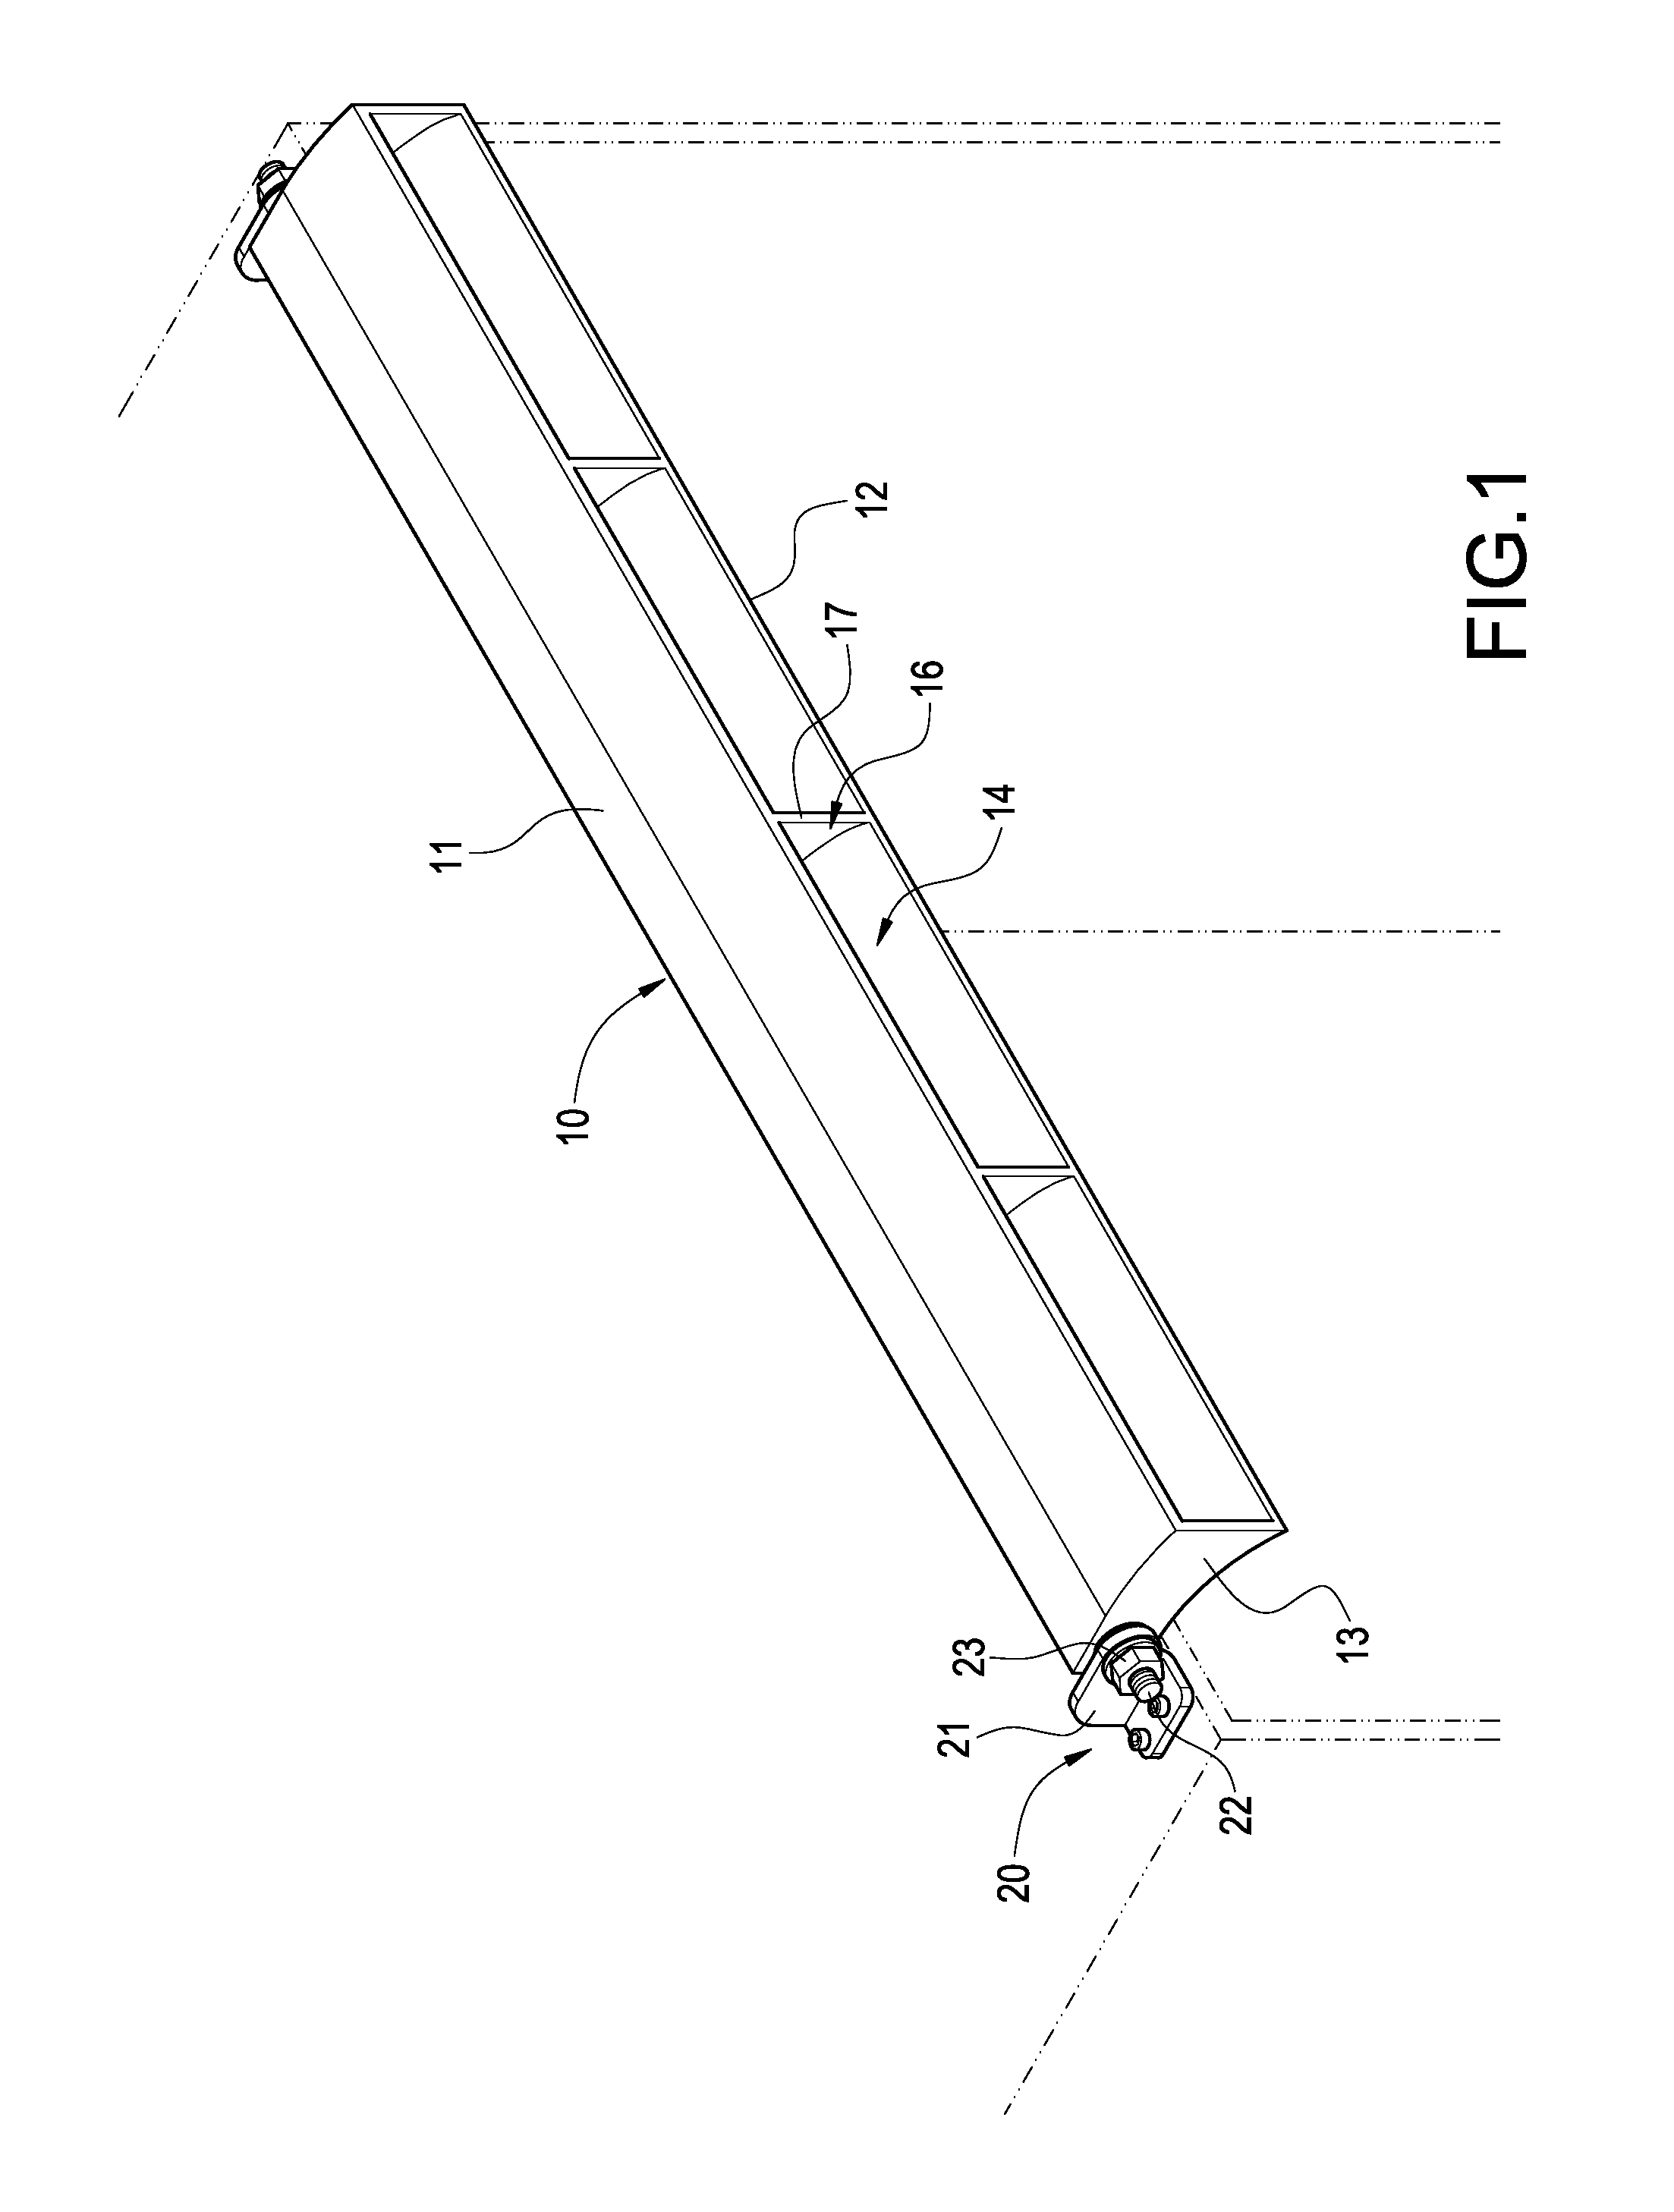 Nozzle-typed drag-reducing structure for vehicle